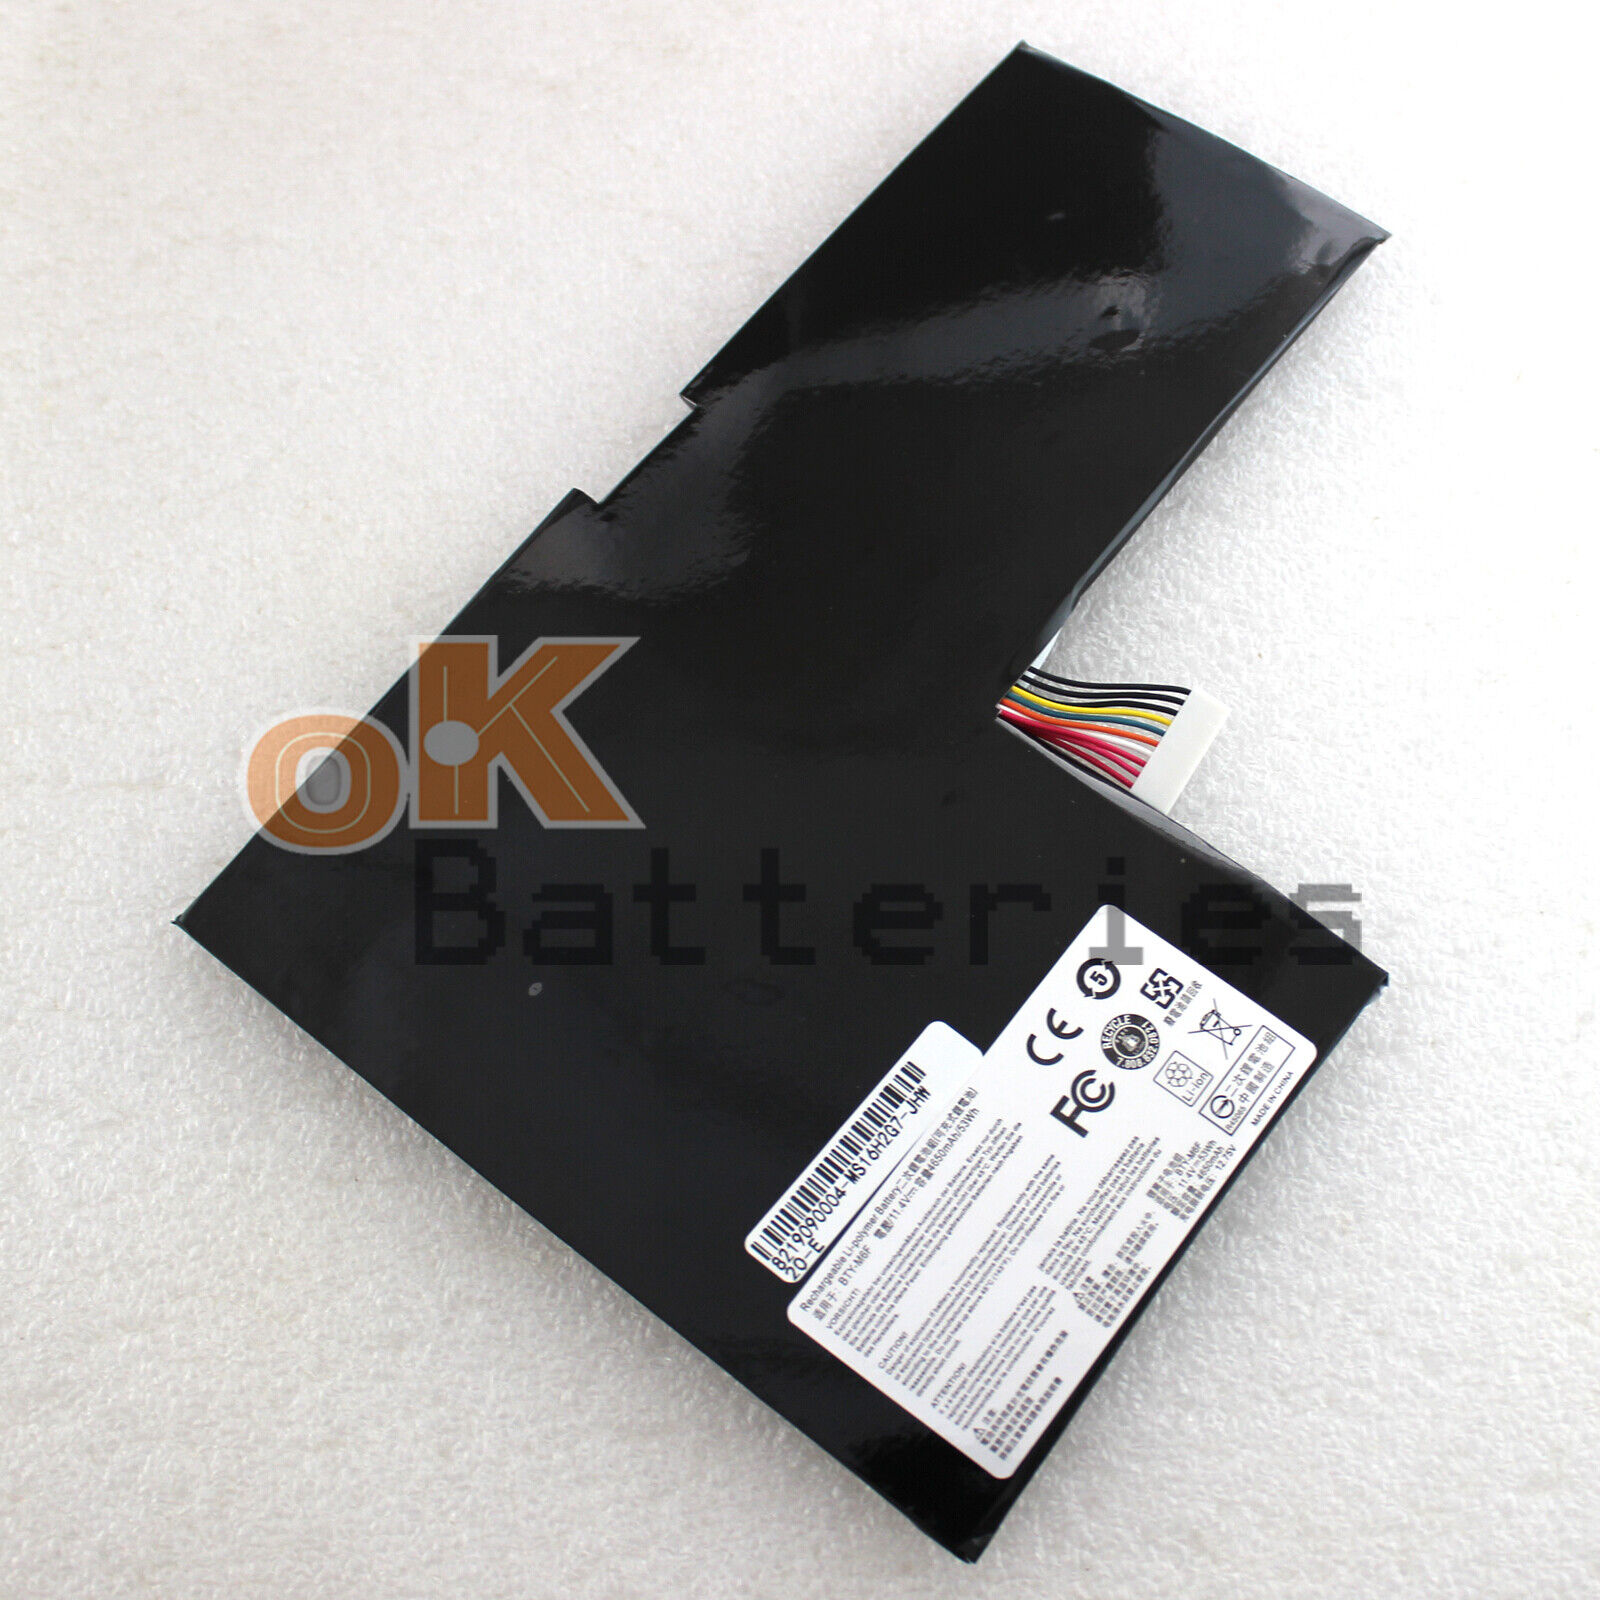 New BTY-M6F Laptop Battery for MSI GS60 2QC 2QE 6QC PX60 6QE MS-16H2